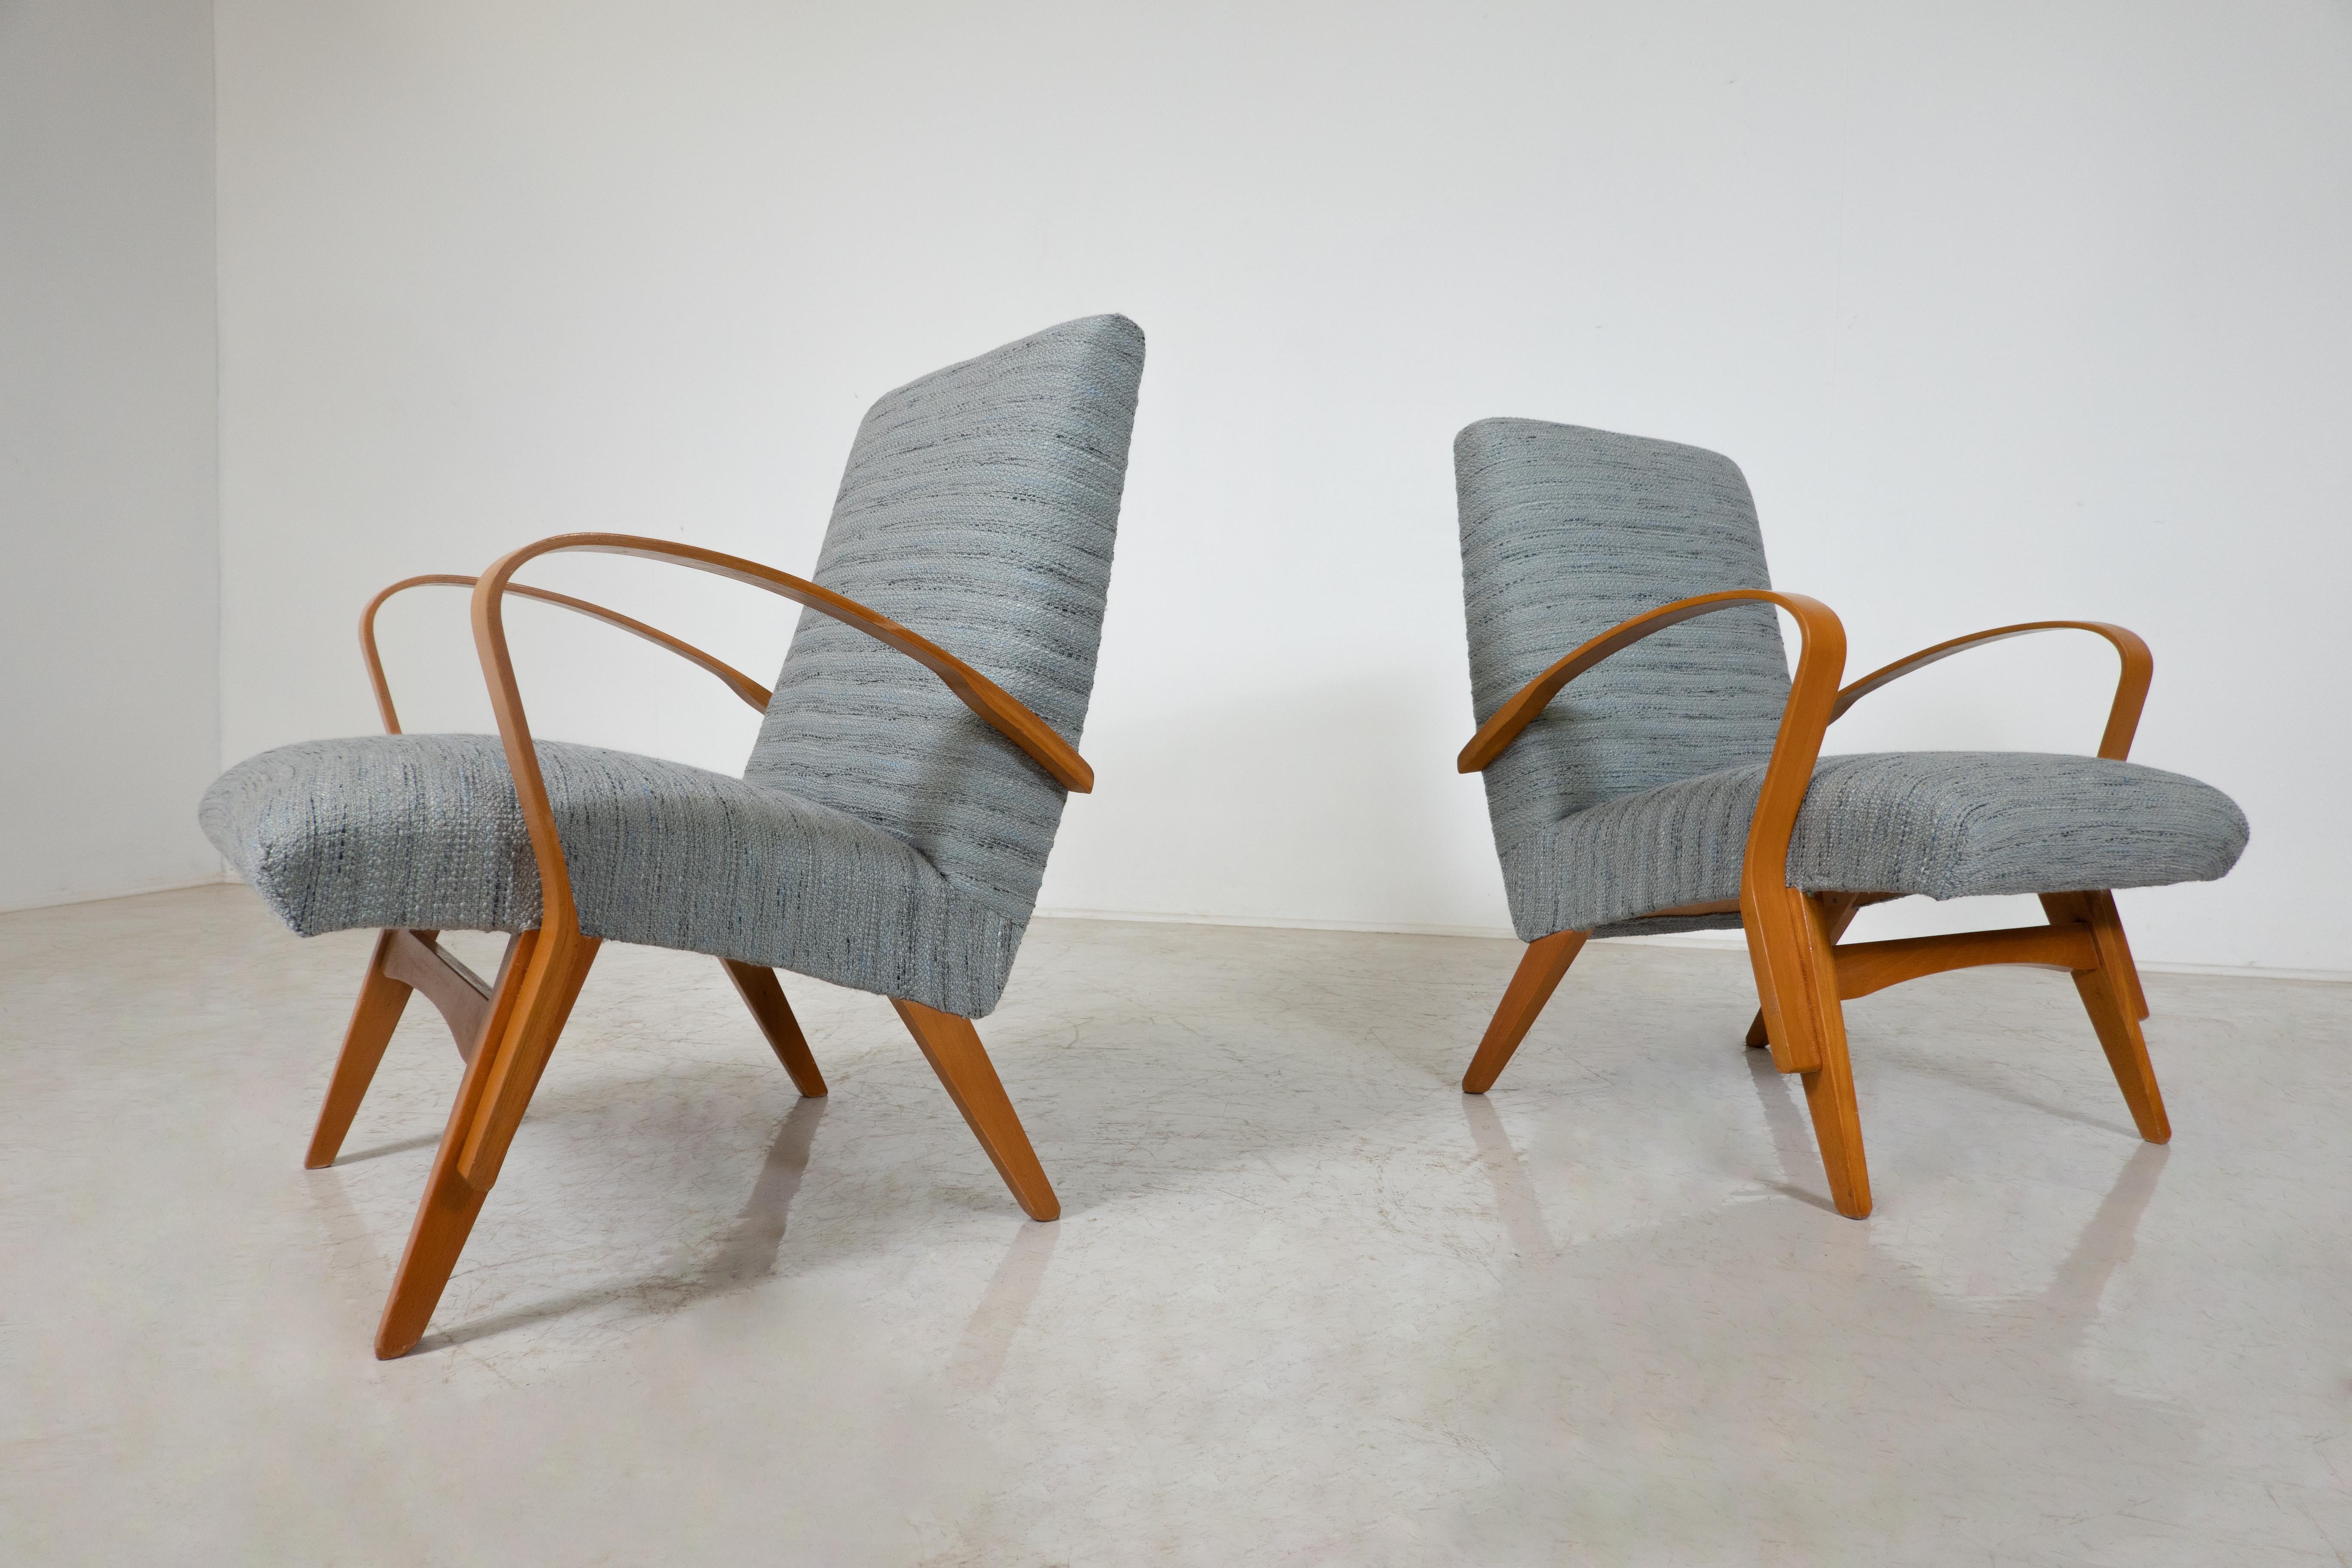 Fabric Mid-Century Modern Pair of Armchairs, 1950s, Czech Republic (New Uphostery) For Sale